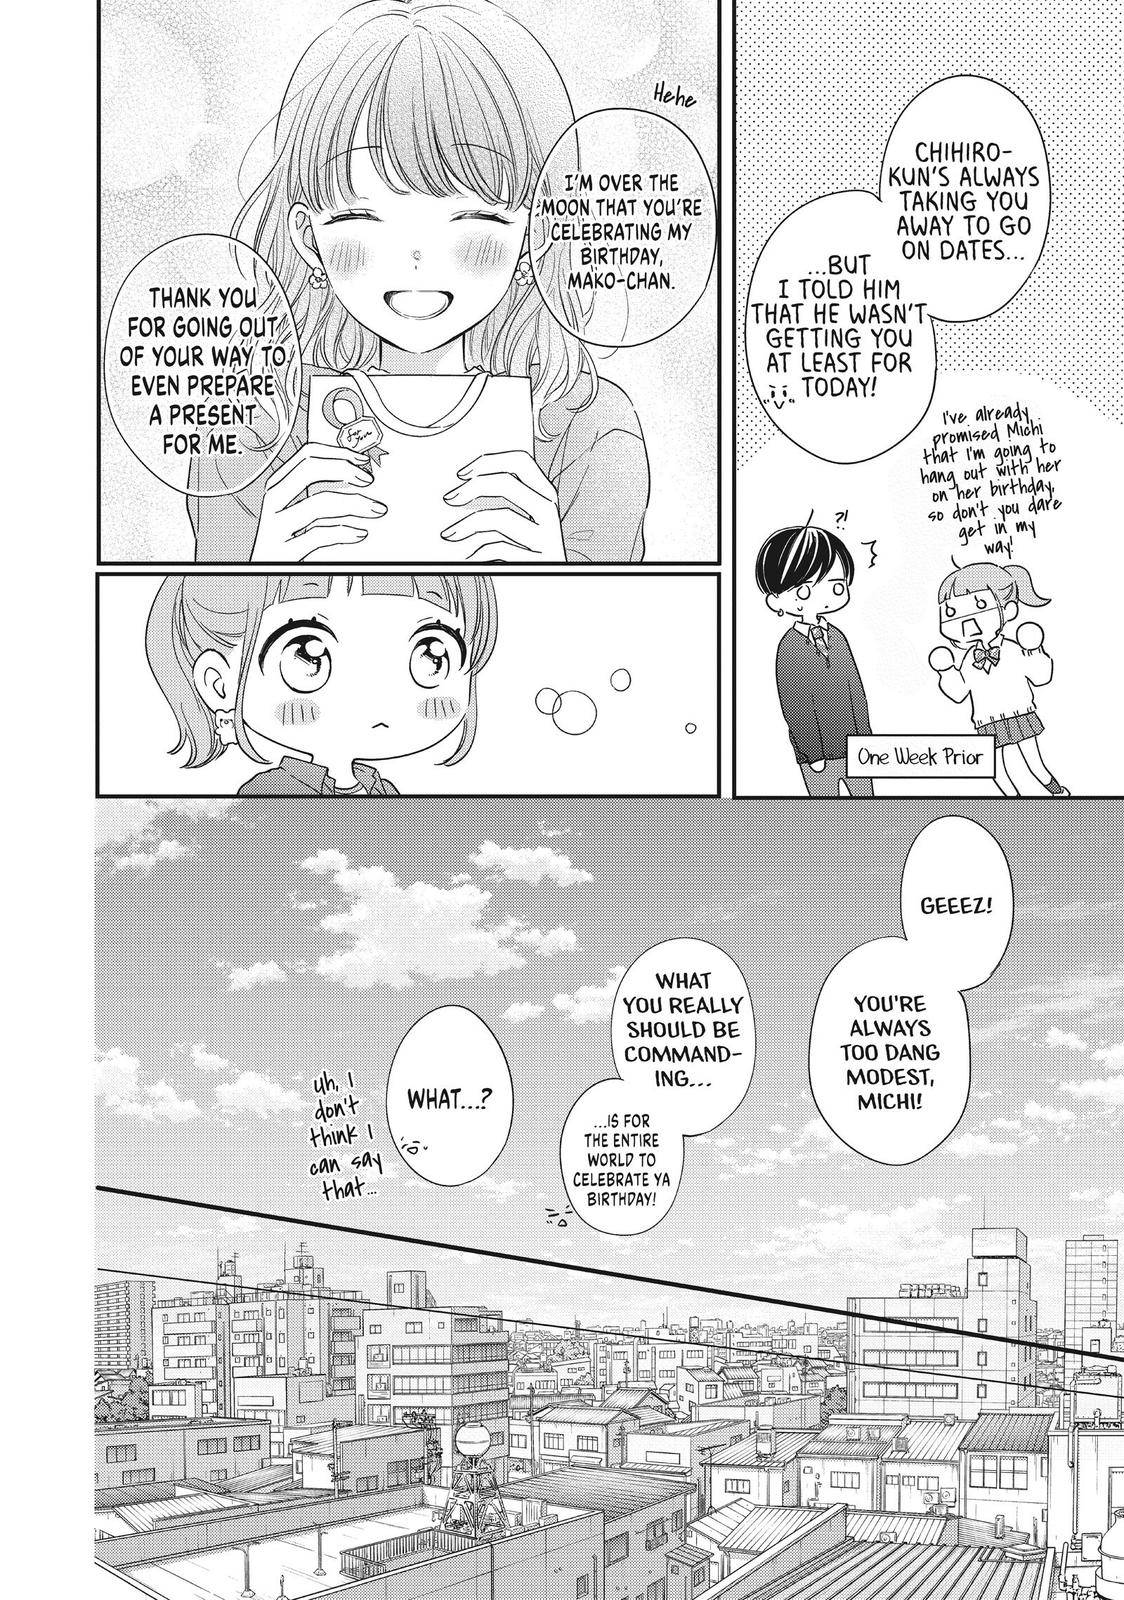 Chihiro-kun Only Has Eyes for Me - chapter 24 - #4